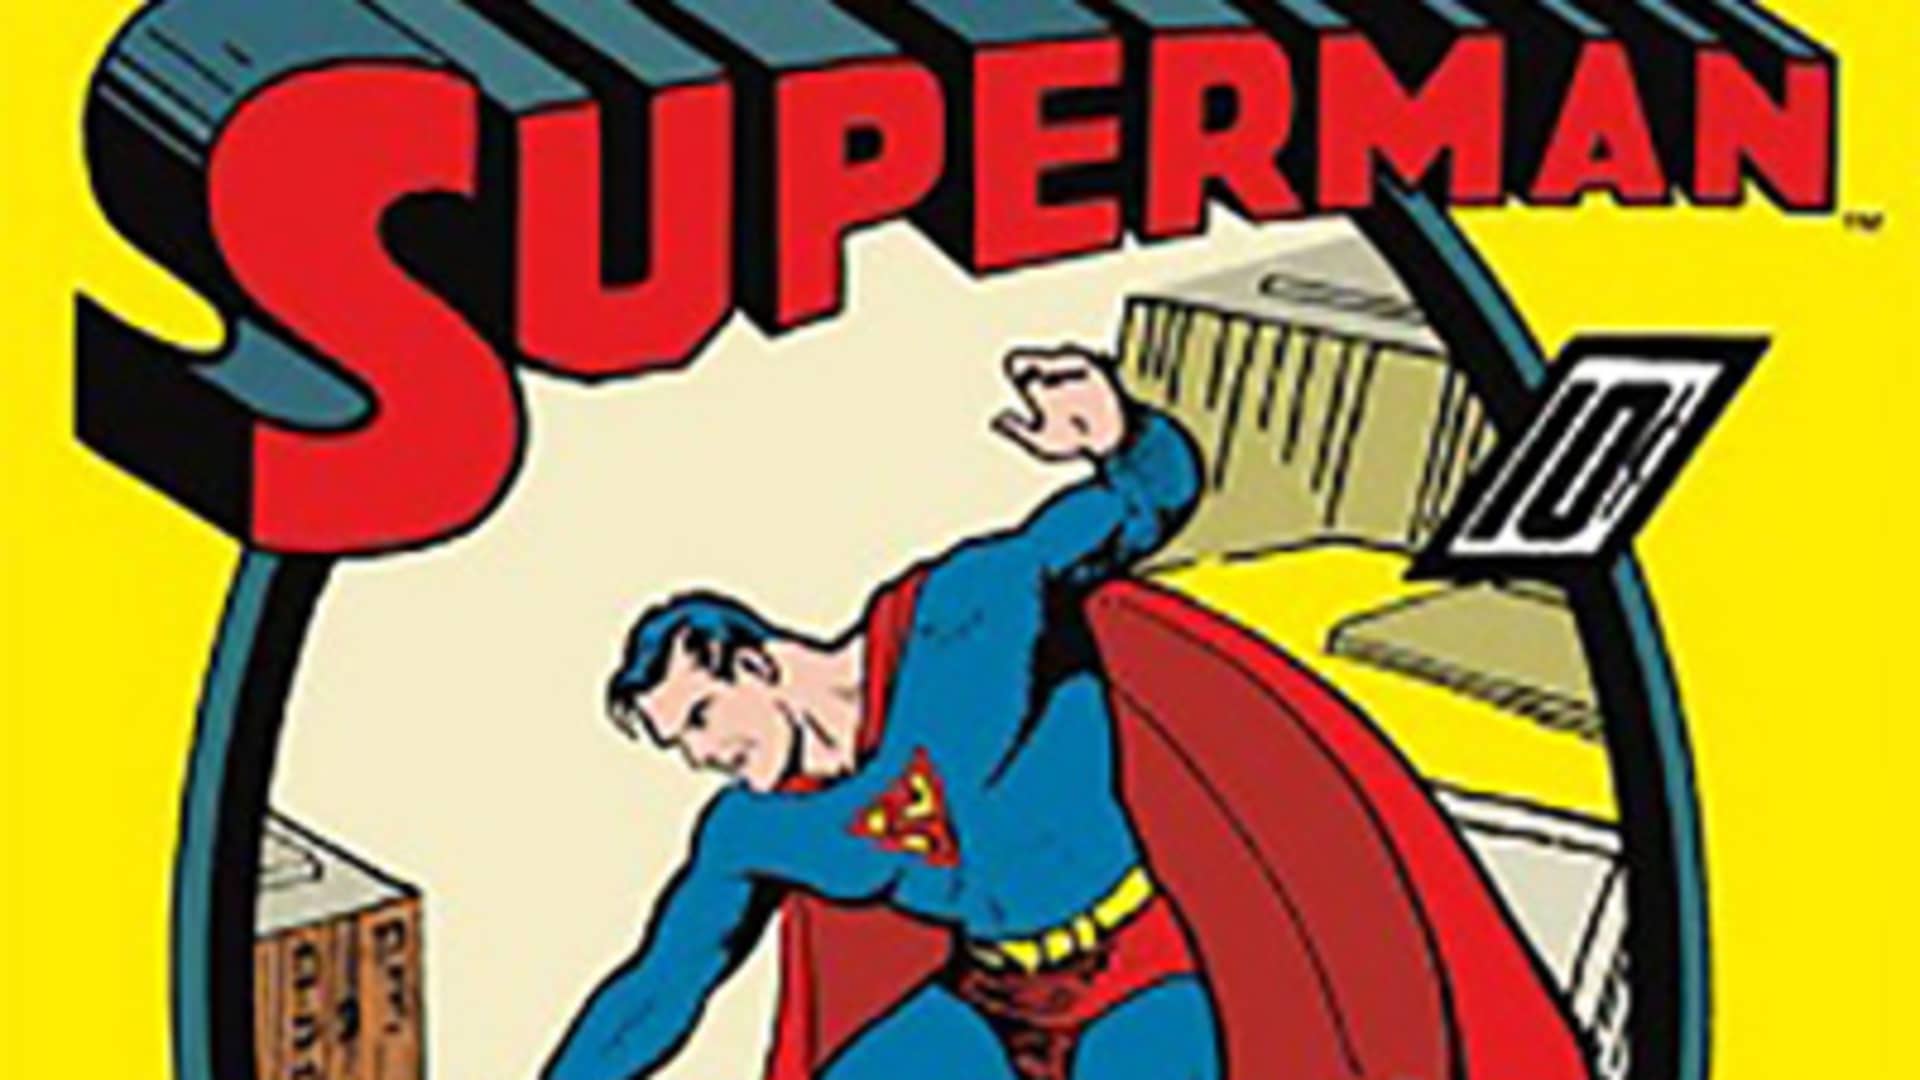 Frank Miller's take on Superman is all about truth and justice